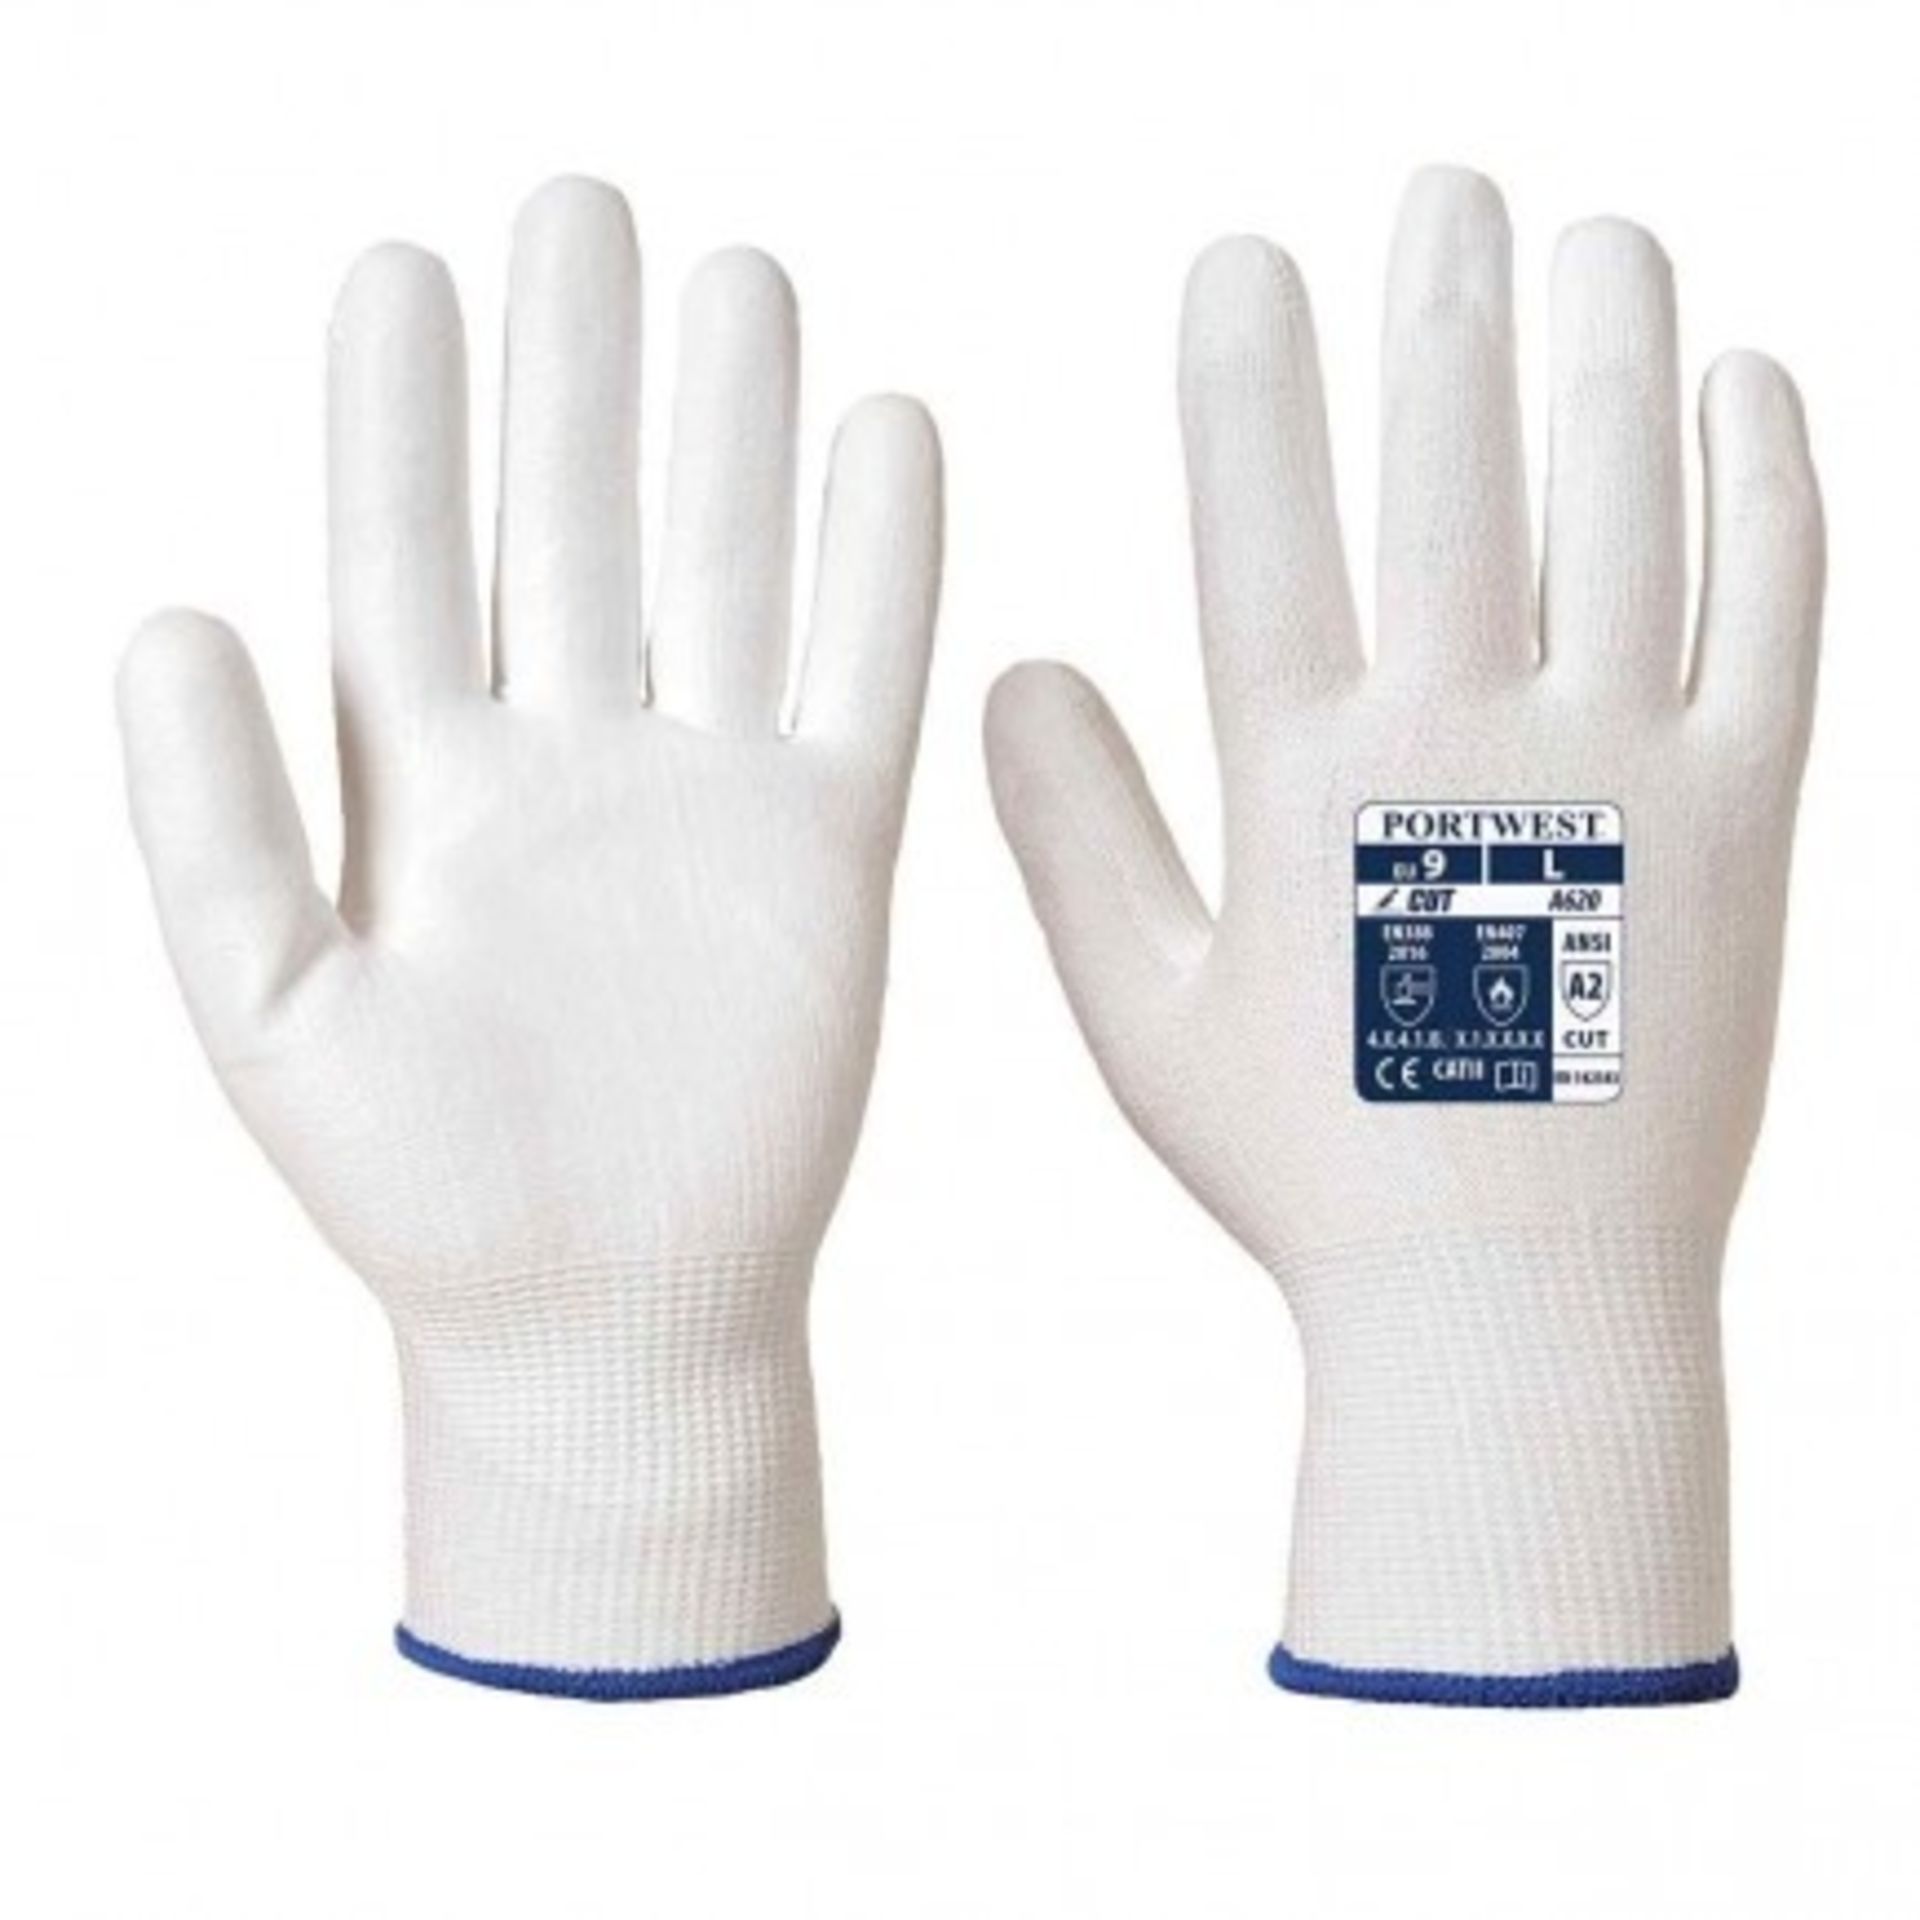 Brand New Portwest 144x White Pairs of PU Palm Gloves -Small £2.70 Each (R44)